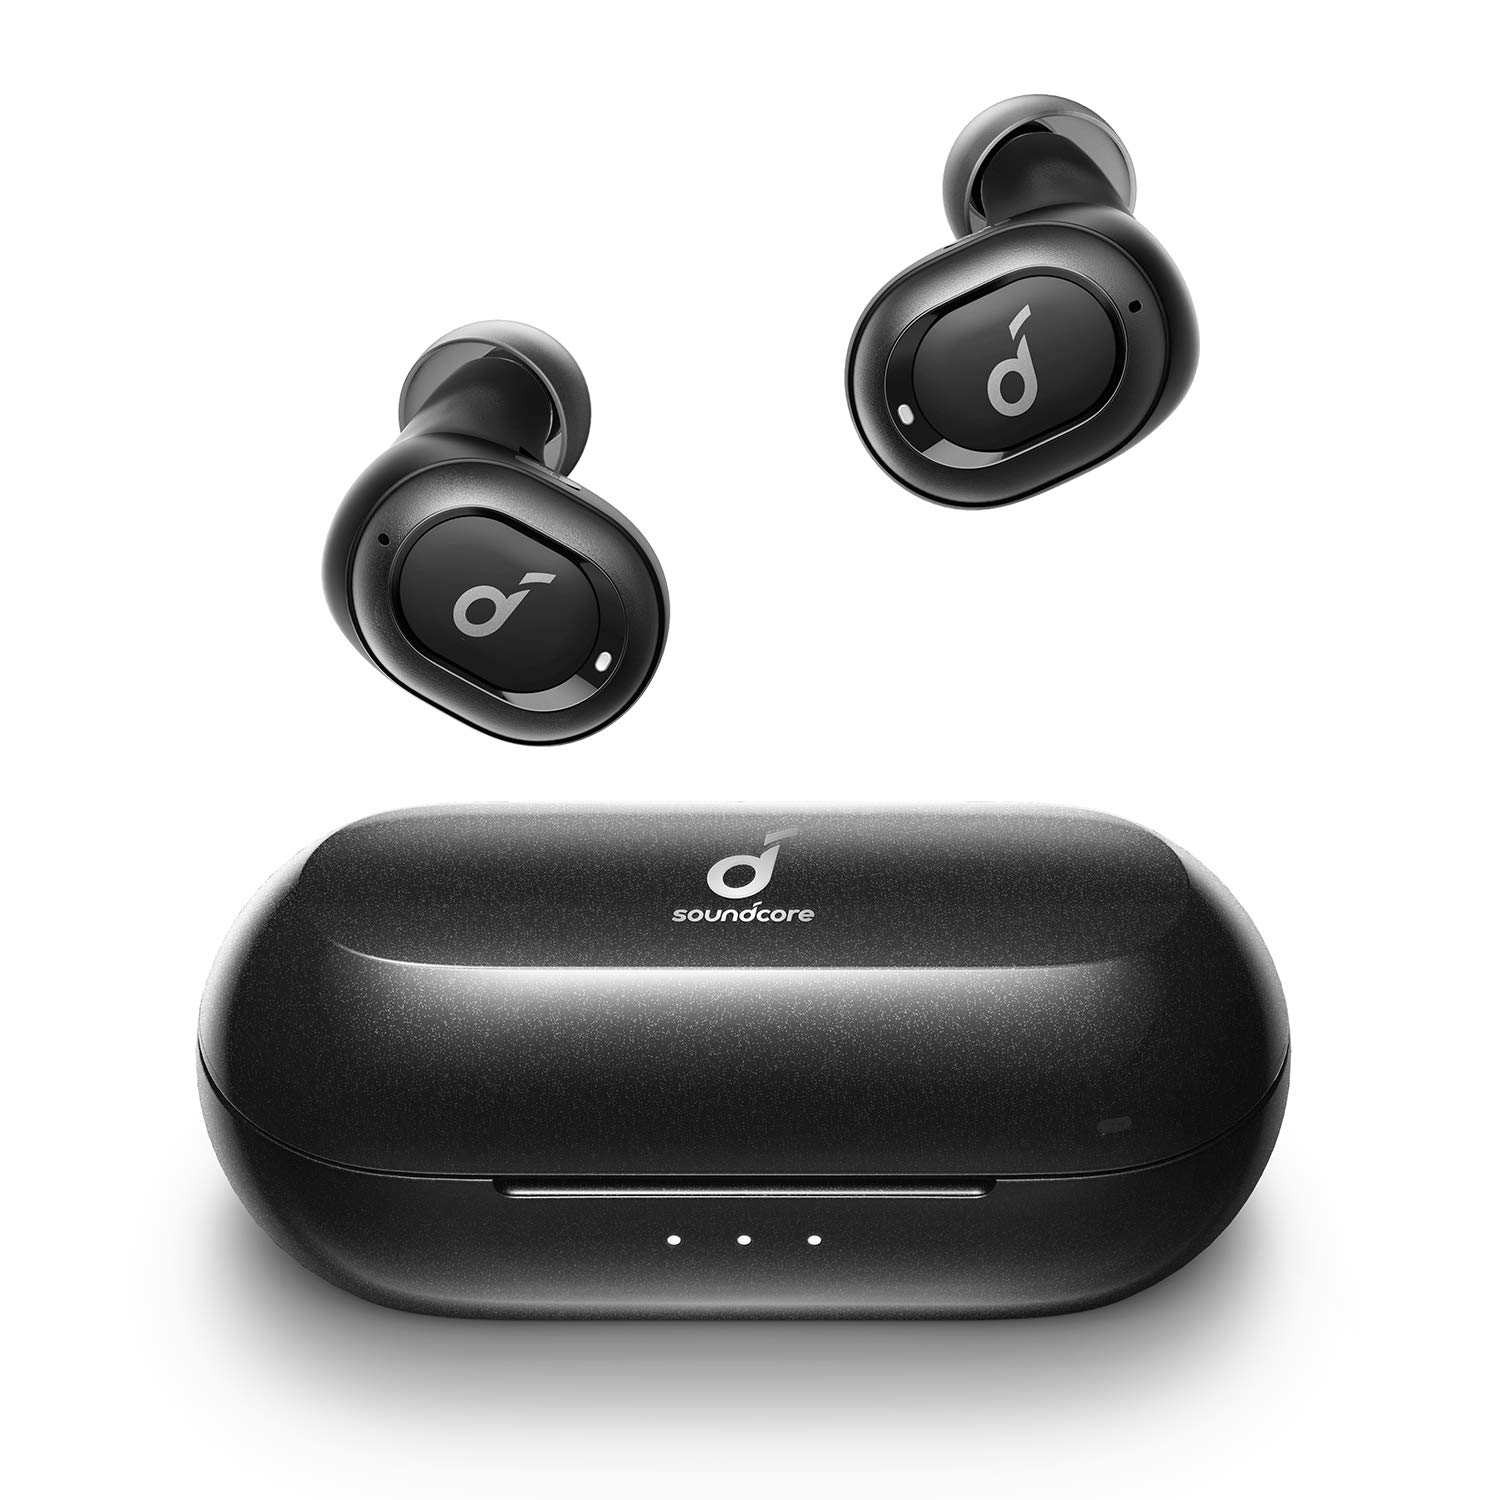 Which wireless earbuds of soundcore are best for small ears? — Sound core Christmas sale 2022